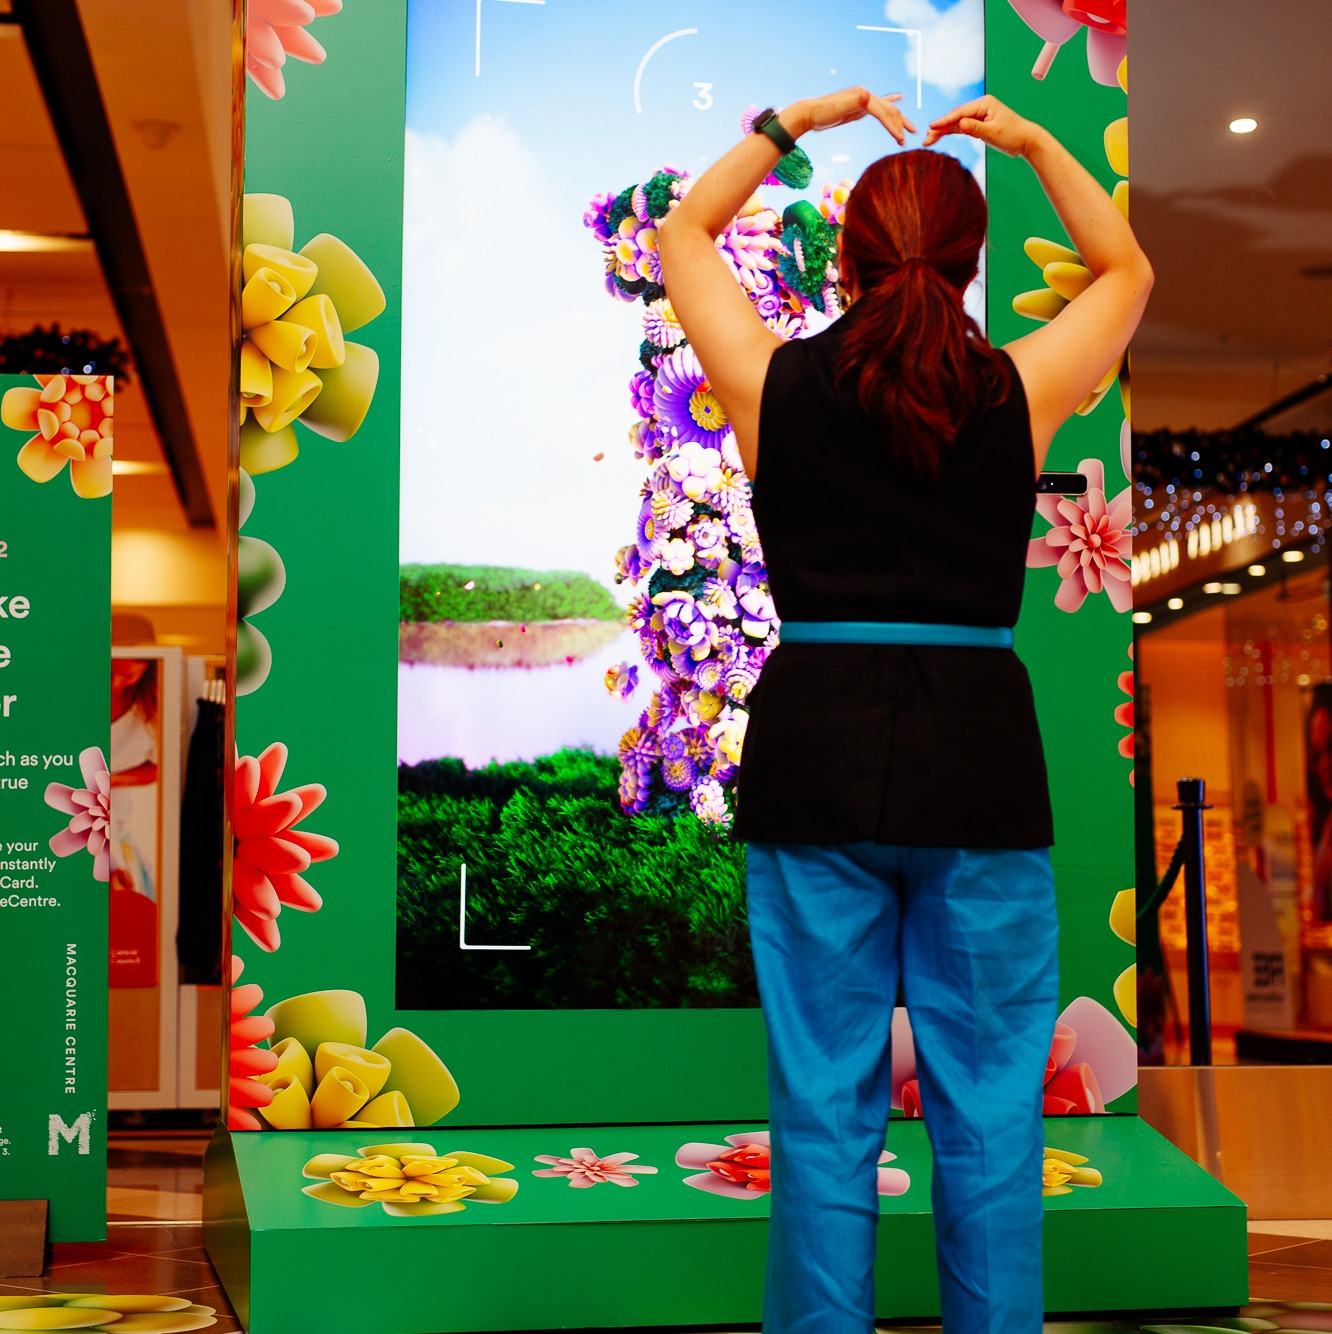 Shoppers interacting with the VANDAL Magic Mirror™ for the Macquarie Center 'Spring Into Action' Experiential campaign